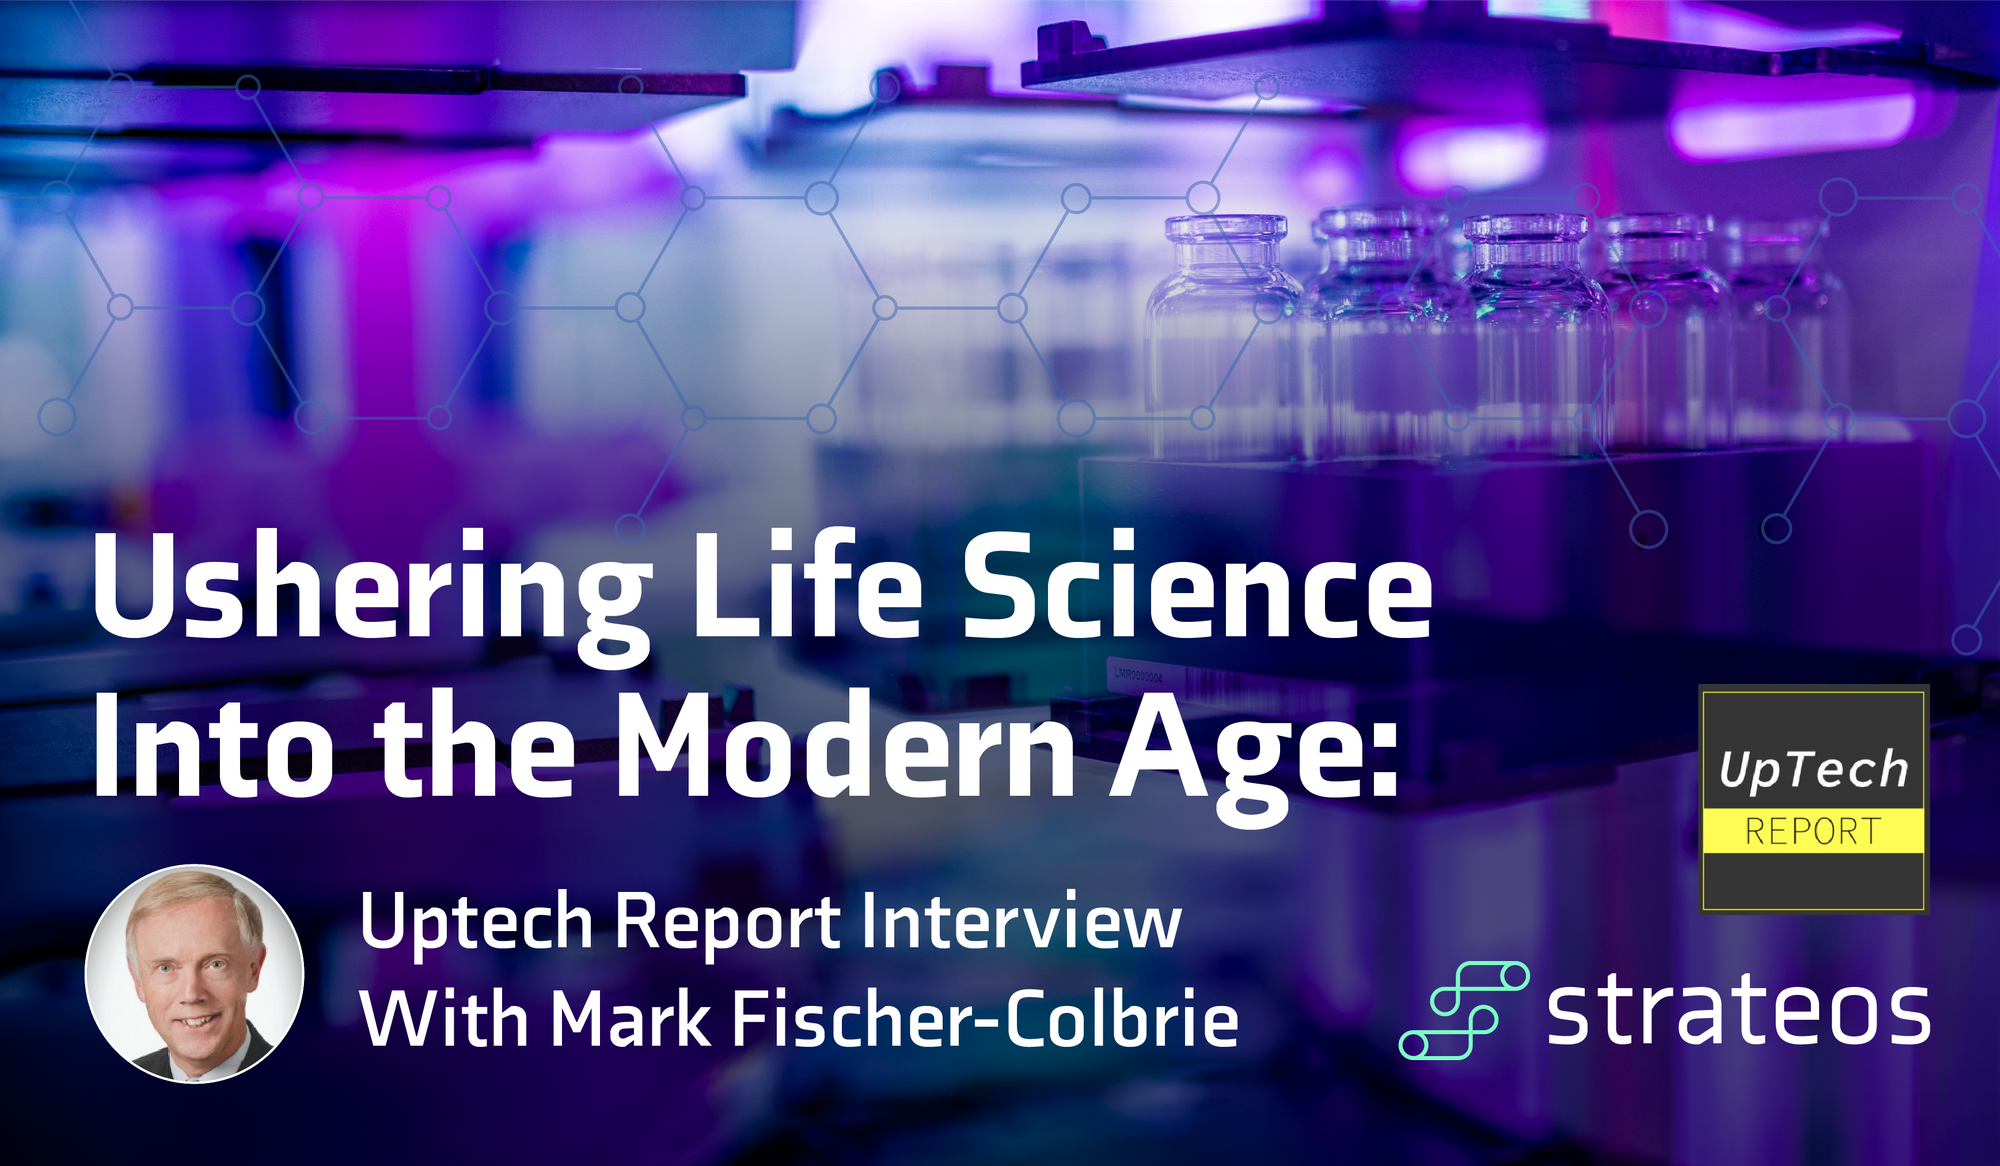 Ushering Life Science Into the Modern Age: Uptech Report Interview With Mark Fischer-Colbrie